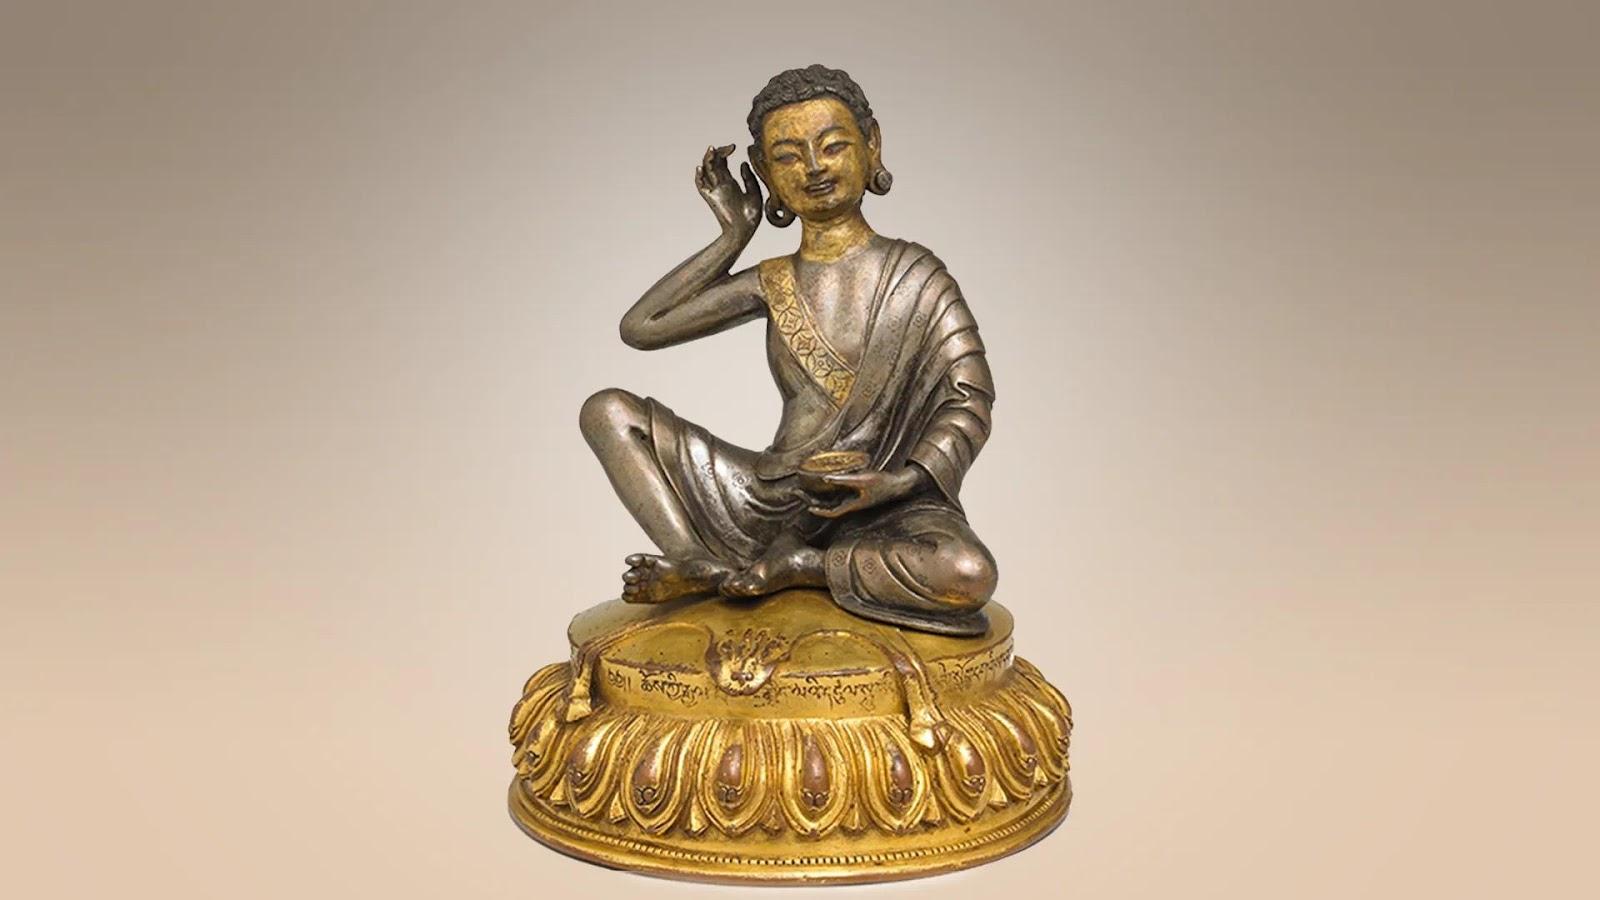 The Nyingjei Lam parcel-gilt silver and gilt-copper figure of Milarepa, Tibet, 15th century